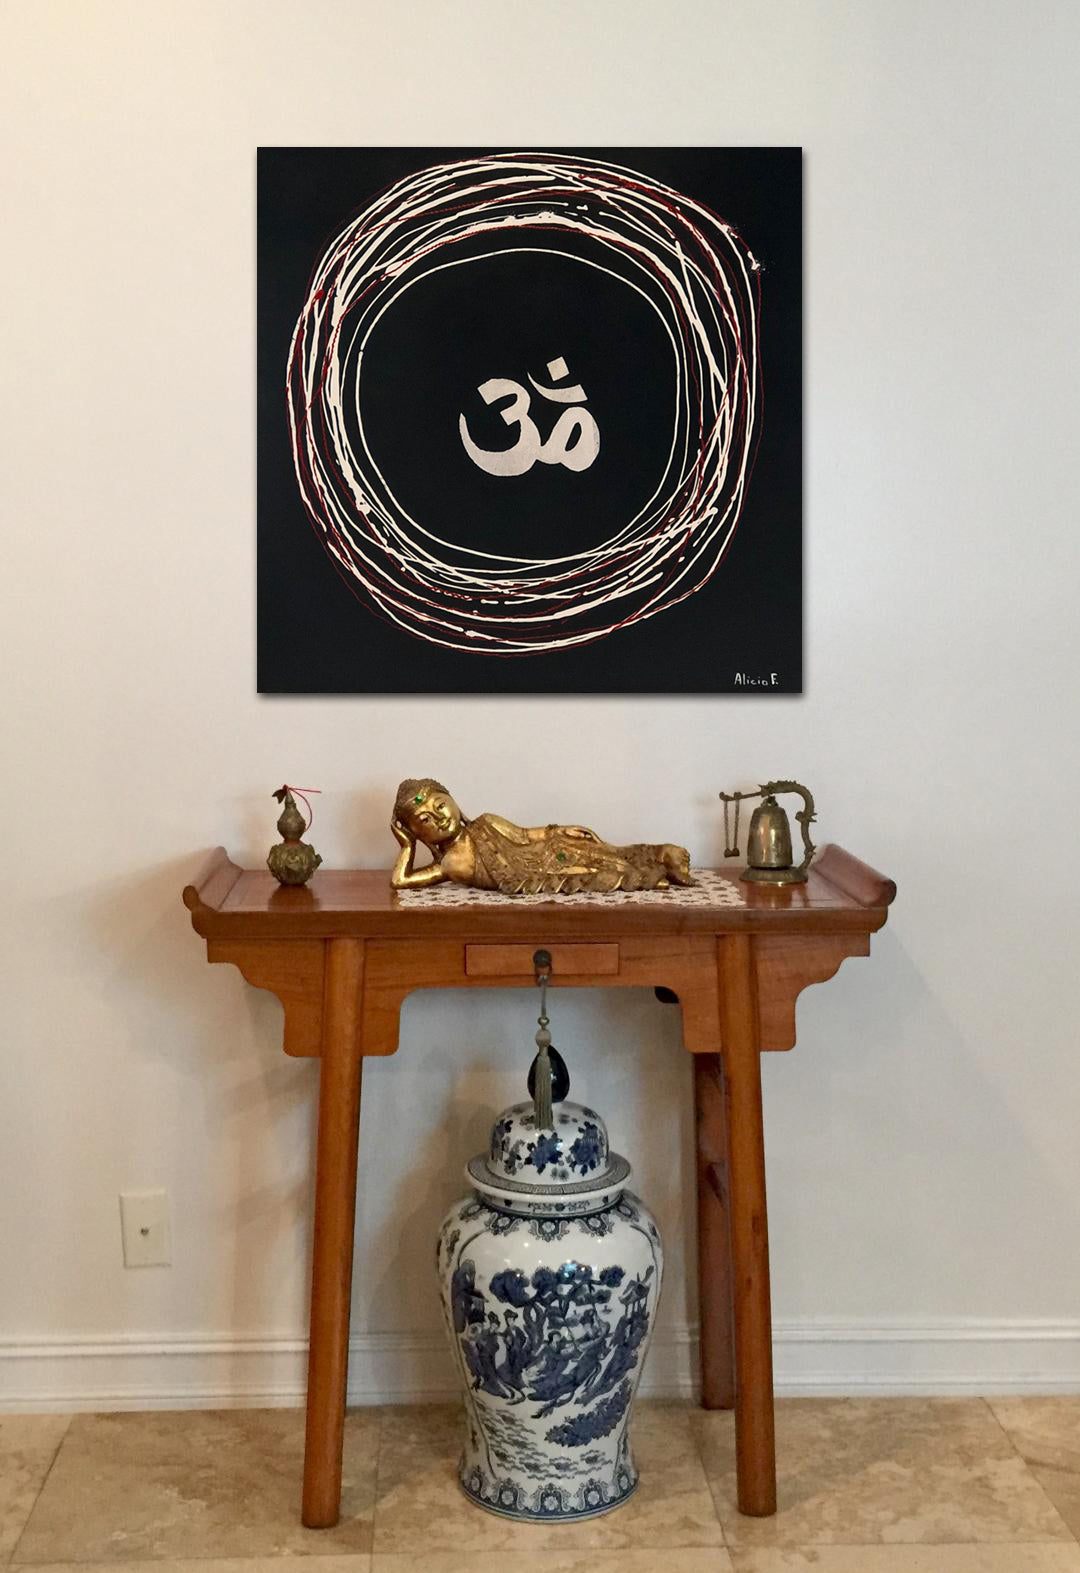 OM in the Circle of Infinity